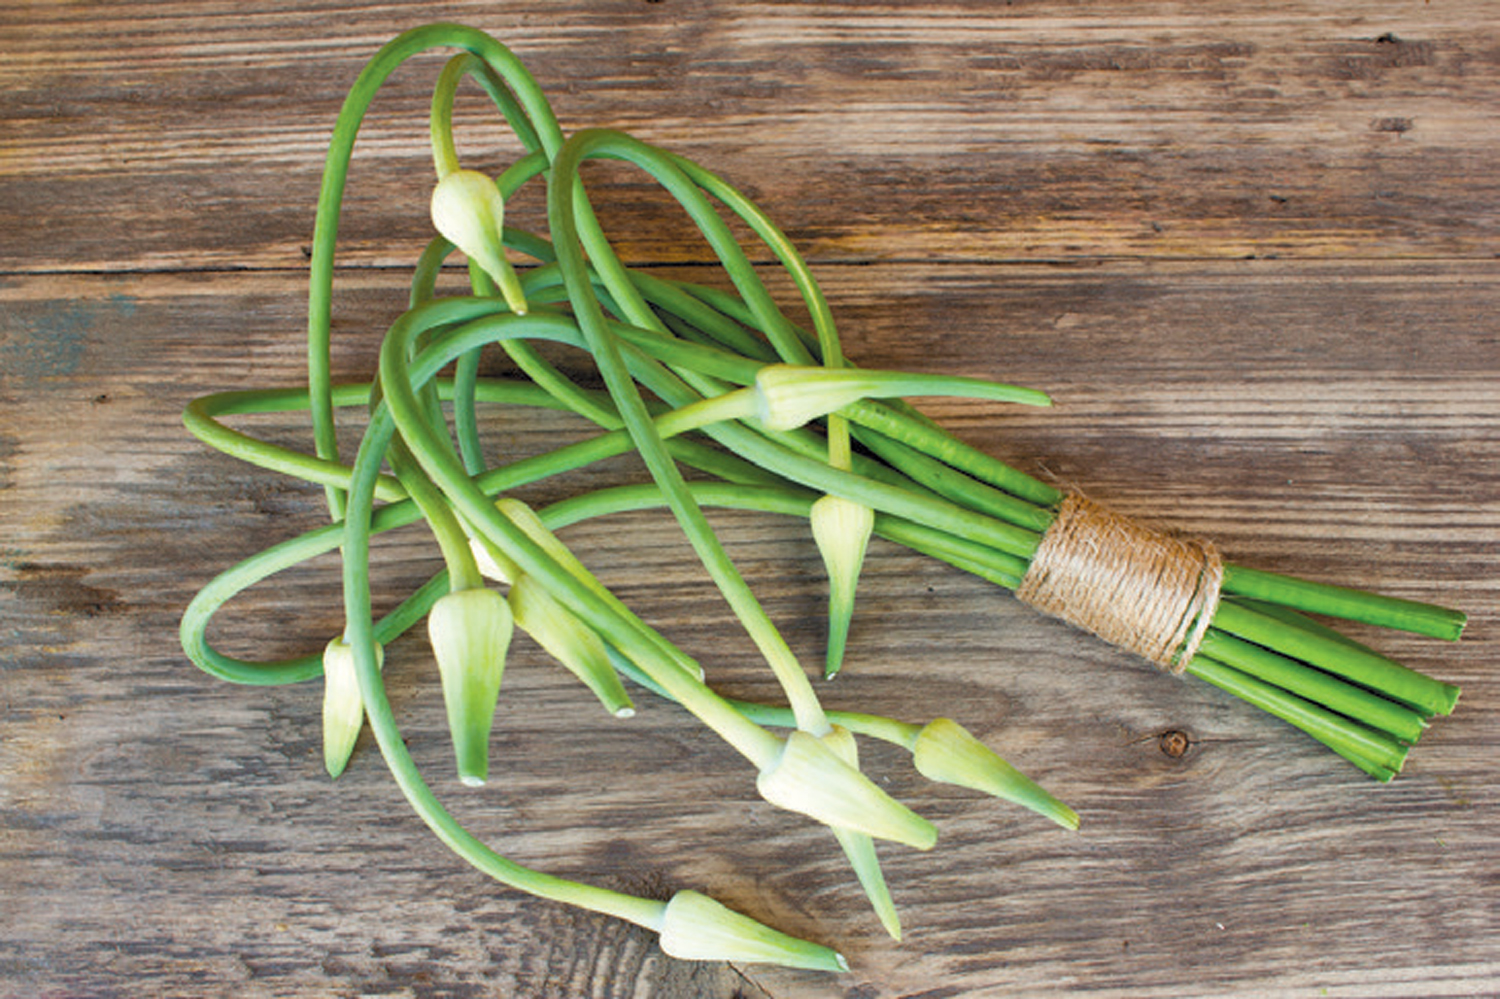 What Do You Do With Garlic Scapes